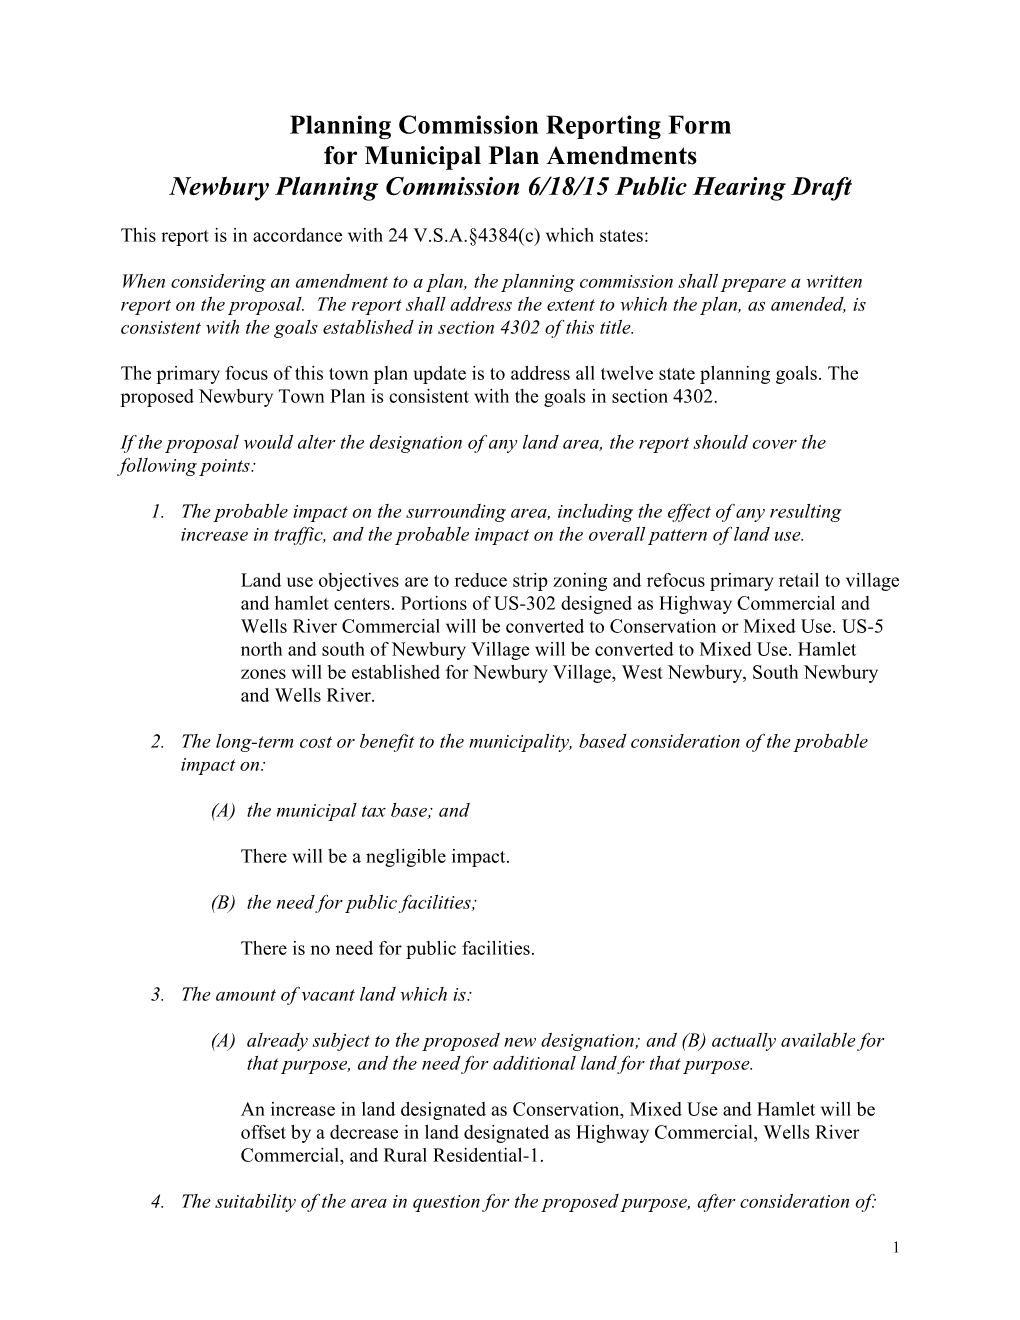 Planning Commission Reporting Form for Municipal Plan Amendments Newbury Planning Commission 6/18/15 Public Hearing Draft